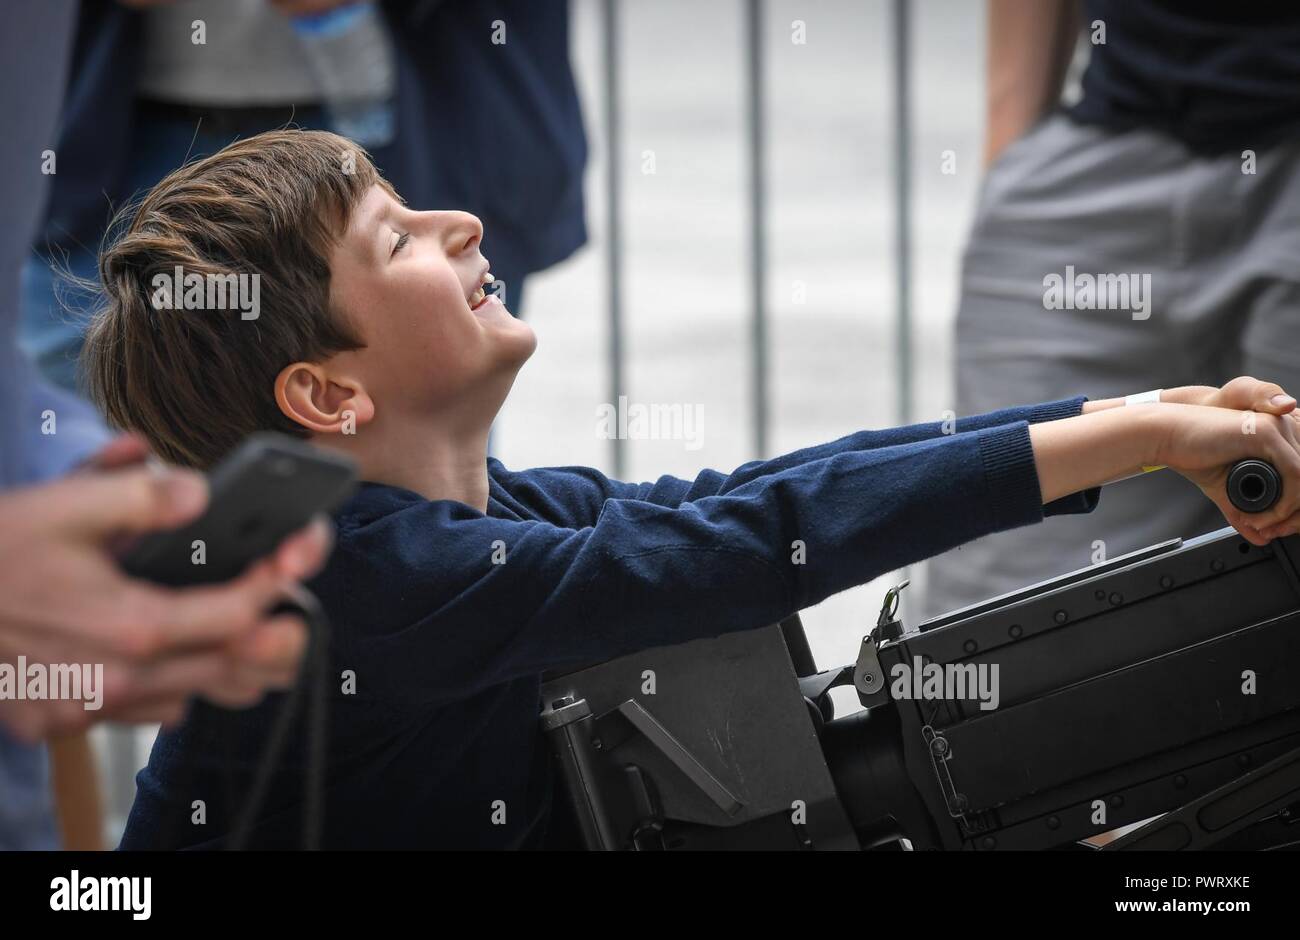 A child struggles to rack a machine gun attached to a CV-22 Osprey from Royal Air Force Mildenhall, England, at Le Bourget Airport, France, during the Paris Air Show, June 23, 2017. The Paris Air Show offers the U.S. a unique opportunity to showcase their leadership in aerospace technology to an international audience. By participating, the U.S. hopes to promote standardization and interoperability of equipment with their NATO allies and international partners. This year marks the 52nd Paris Air Show and the event features more than 100 aircraft from around the world. Stock Photo